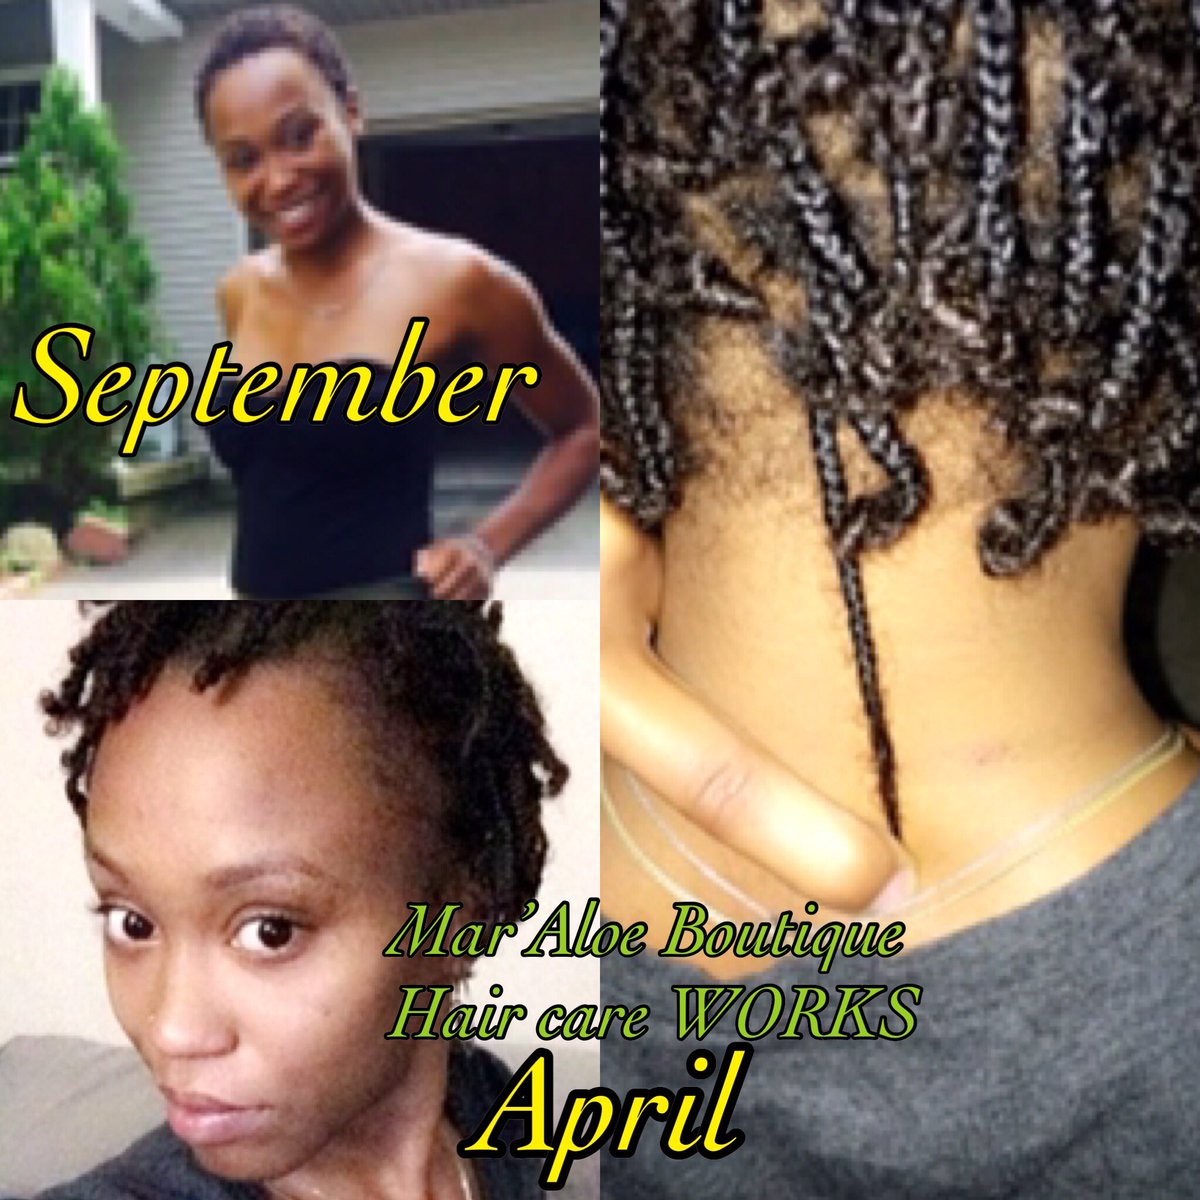 Real results Maraloe Boutique
#hairgrowth#haircare#organichaircare#natural#naturalhair#naturalhaircar#curlyhair#allhairtypes#blackowned#webuyblack#itworks#plantbased#vegan#